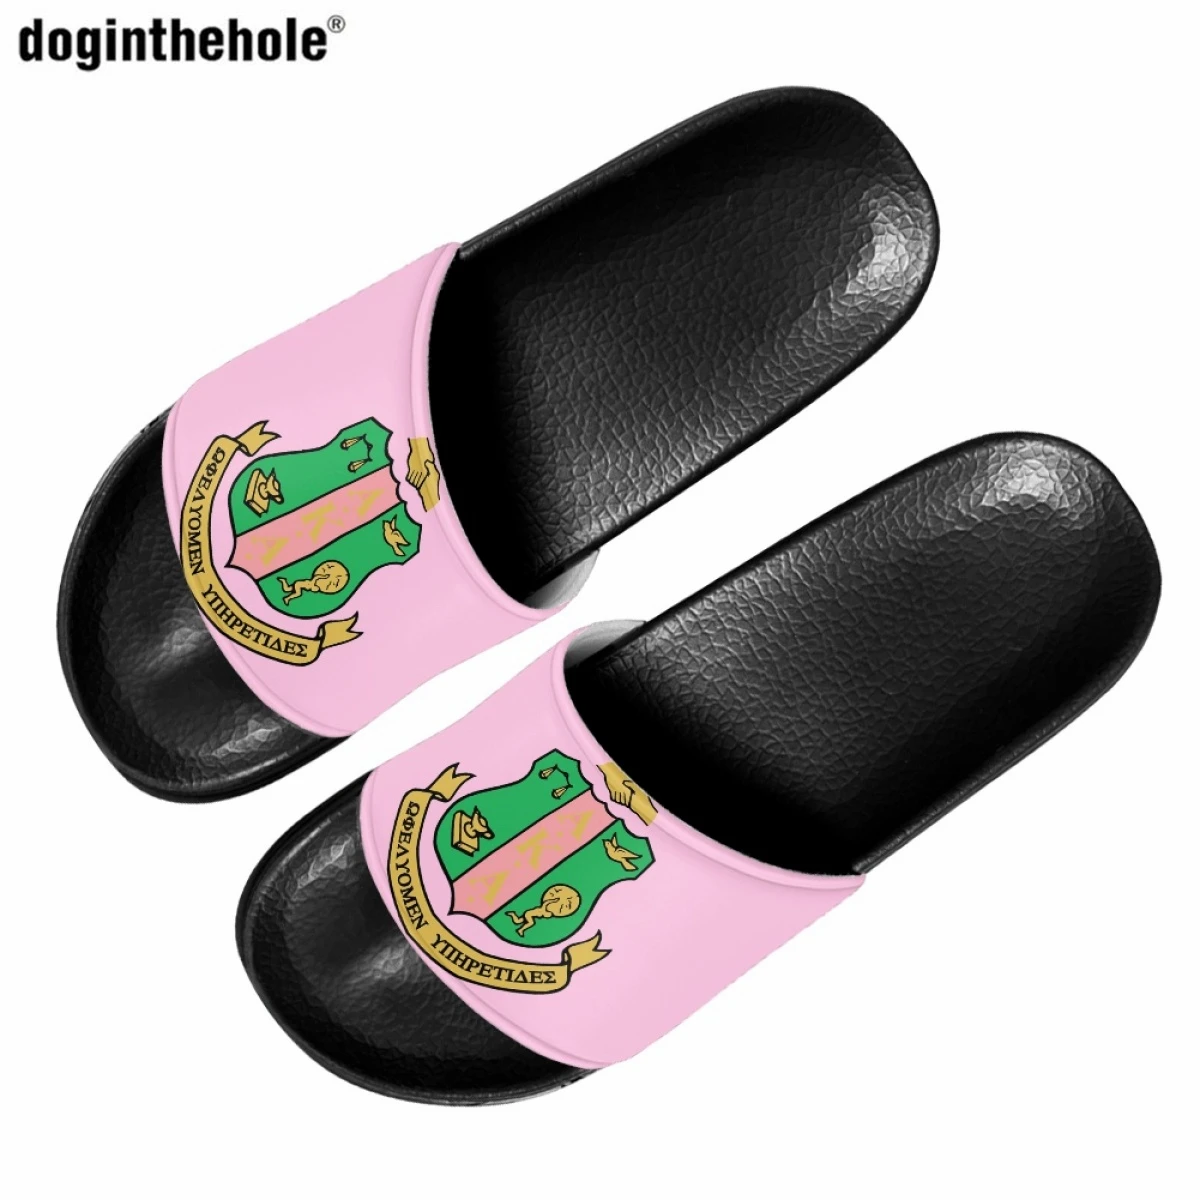 

Doginthehole Alpha Kappa Alpha Sorority Women's Fashion Summer Slippers Home Non-slip Slippers Outdoor Couple Beach Sandals